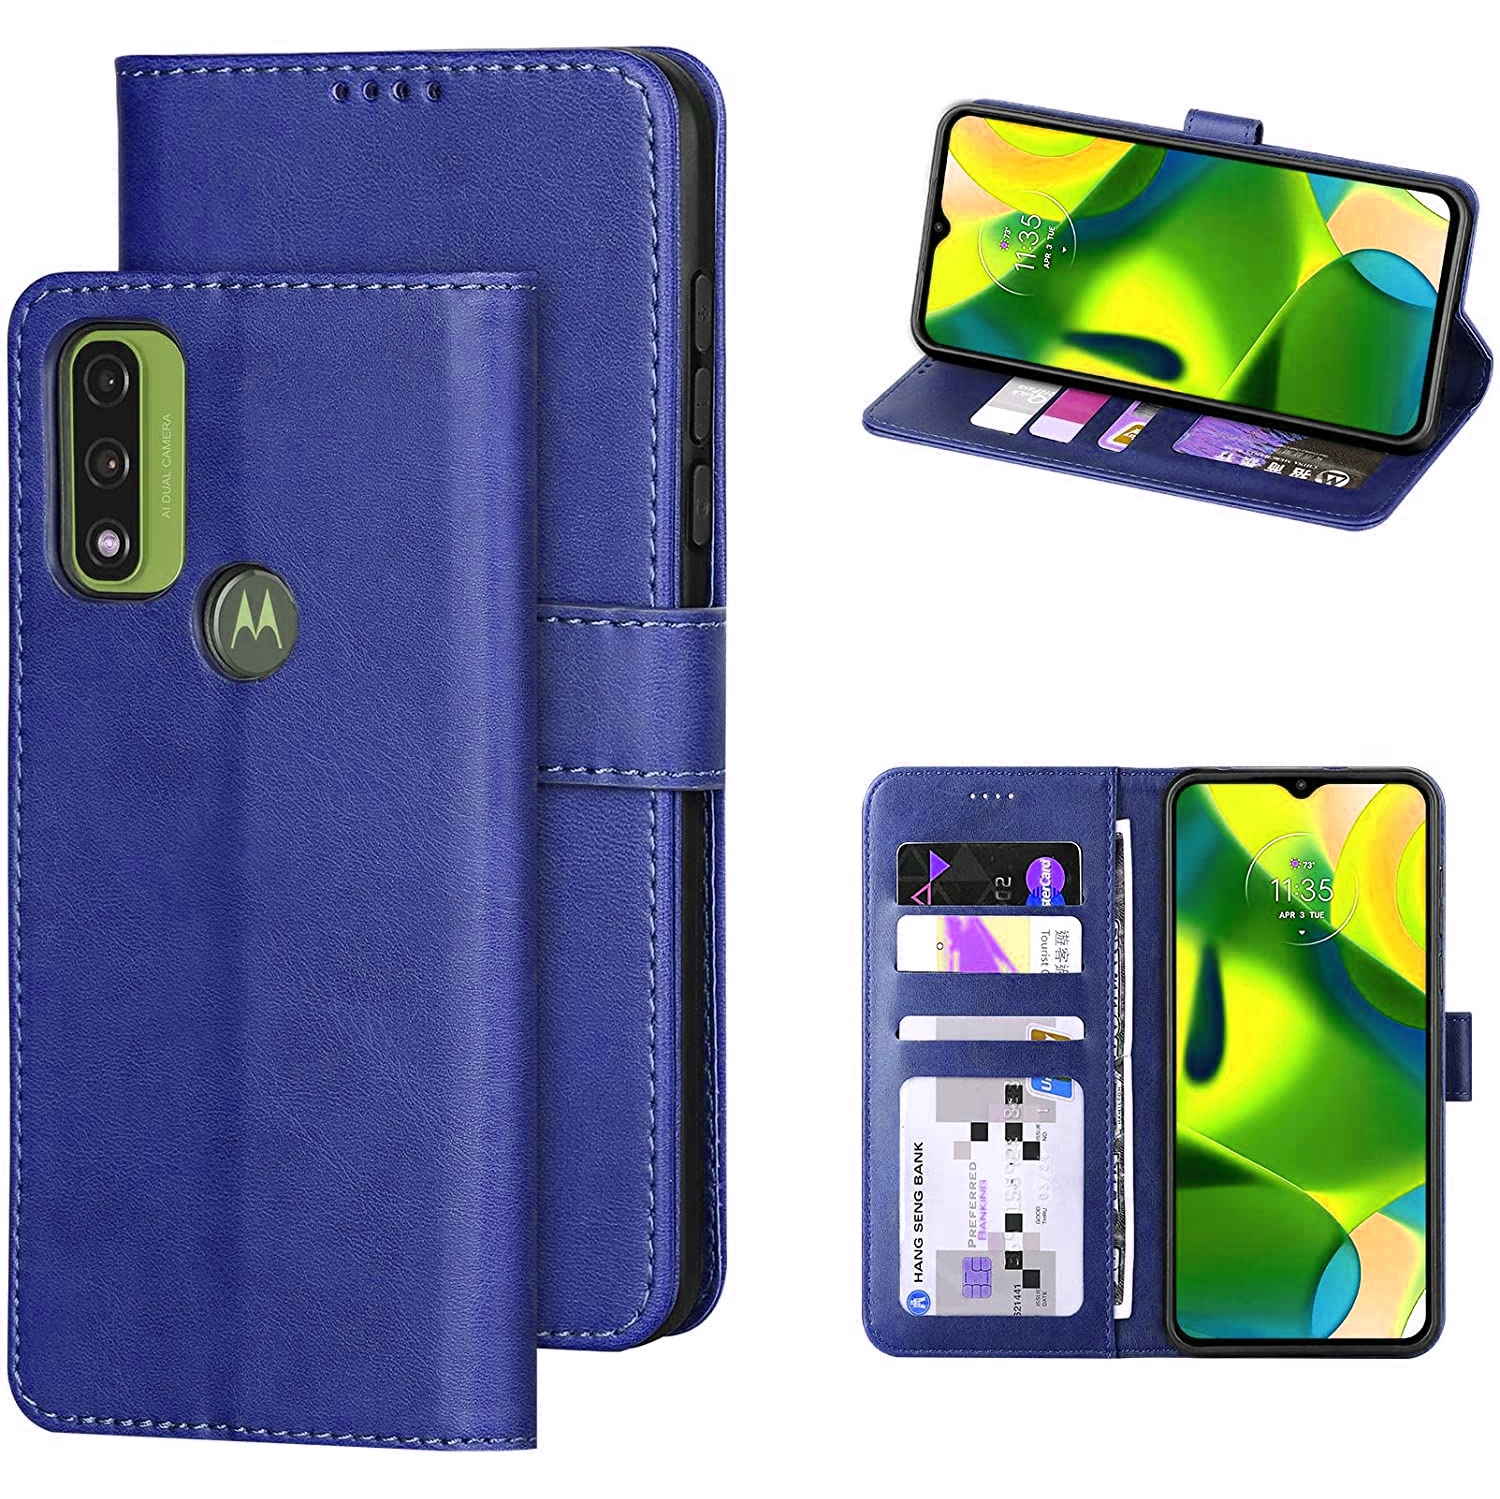 [CS] Motorola Moto G Pure 2021 Case, Magnetic Leather Folio Wallet Flip Case Cover with Card Slot, Navy